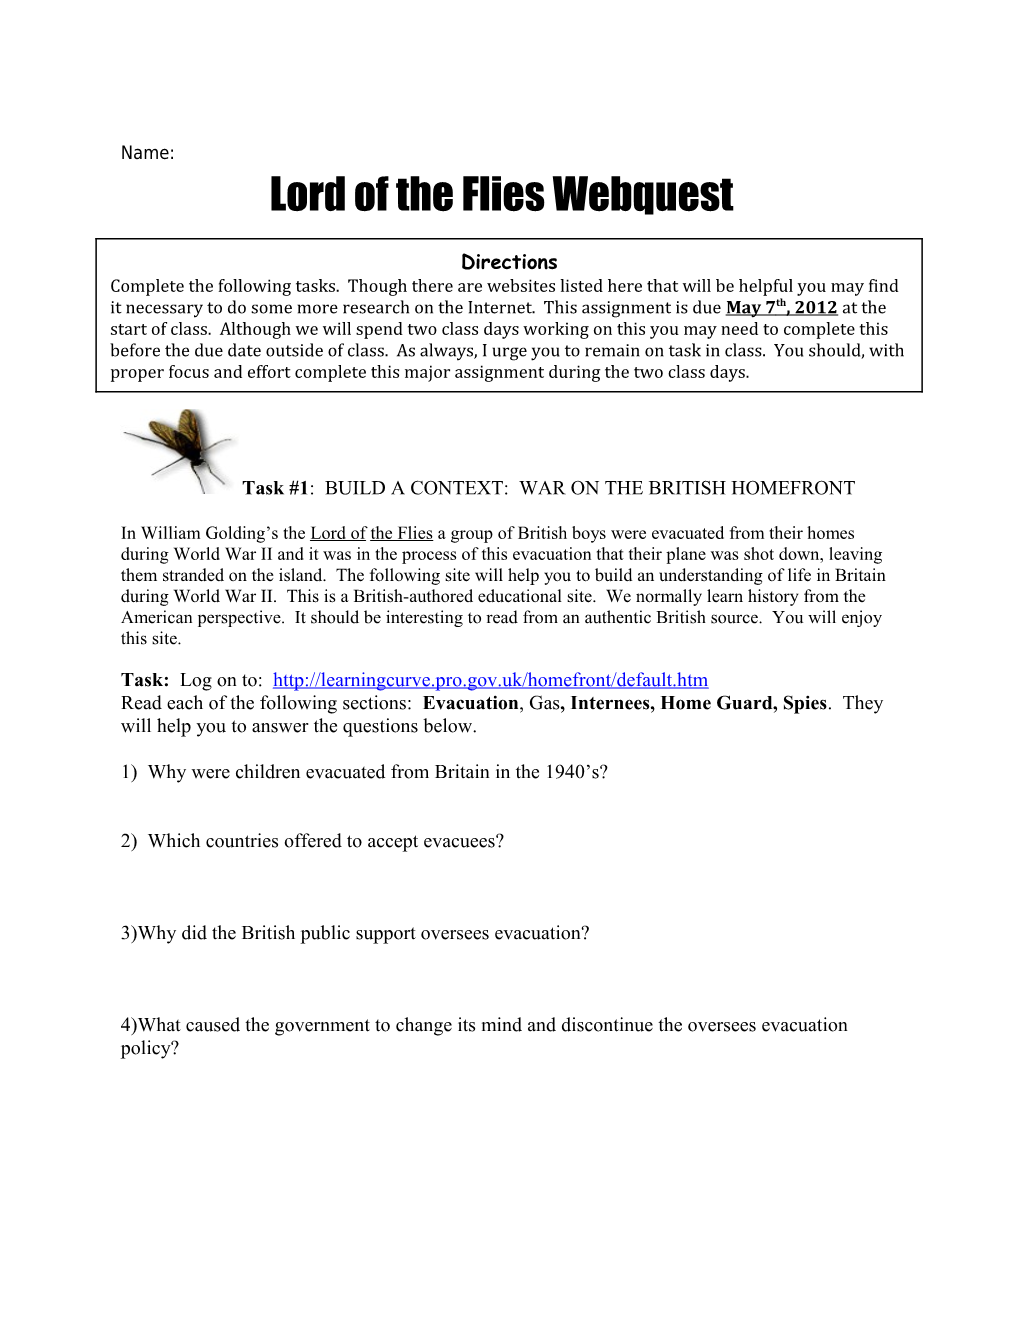 Lord of the Flies Webquest